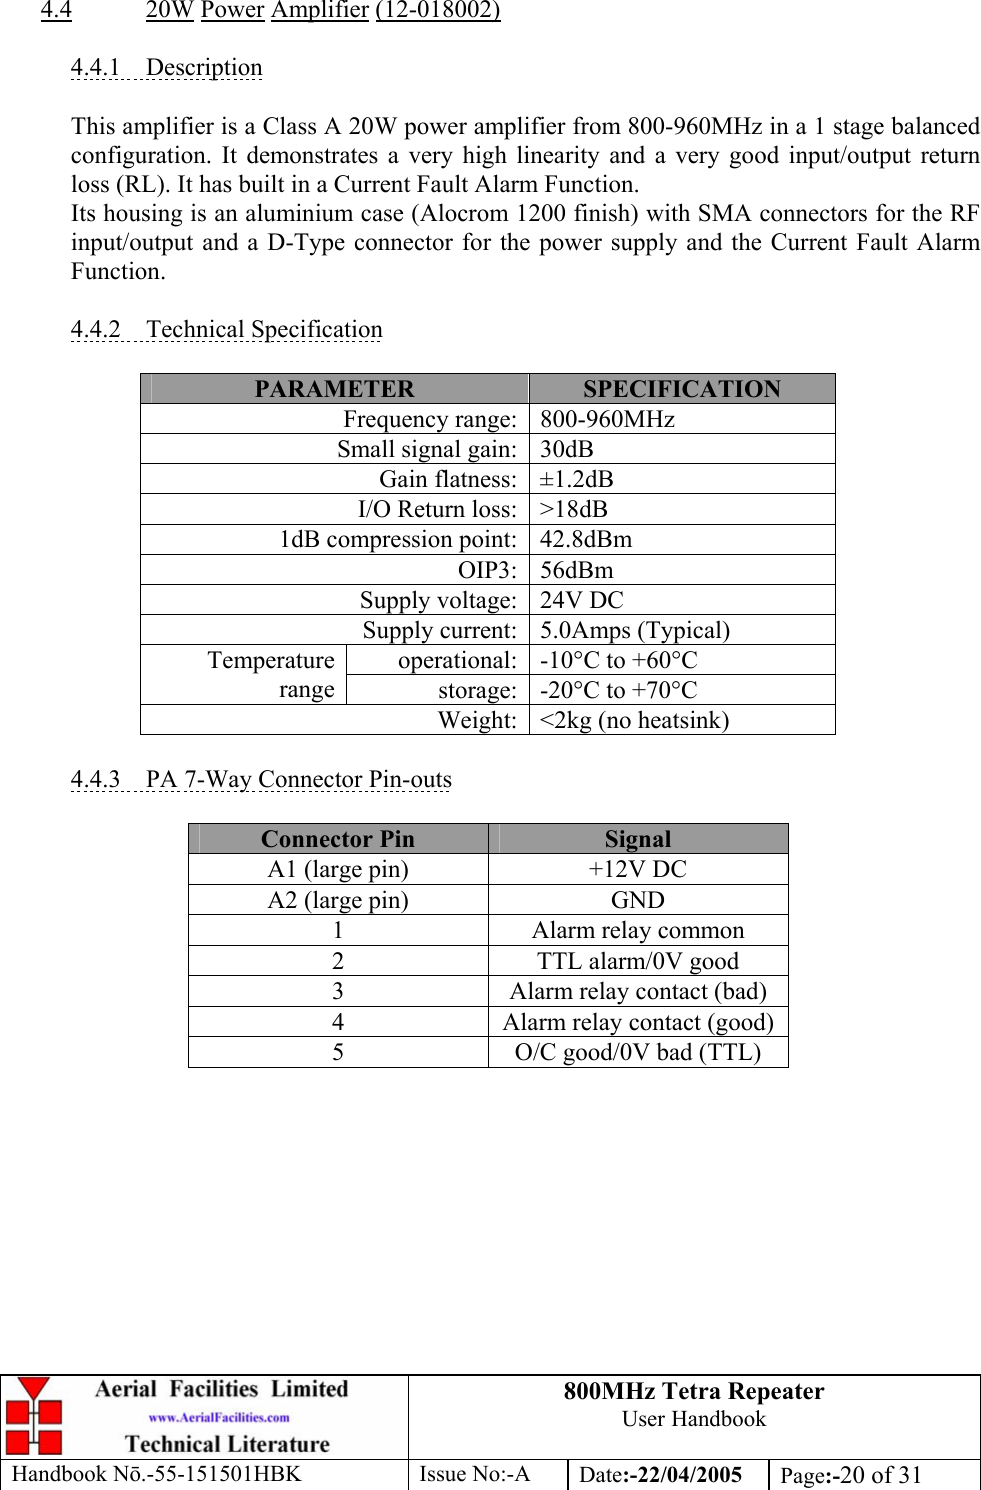 800MHz Tetra Repeater User Handbook Handbook Nō.-55-151501HBK Issue No:-A Date:-22/04/2005  Page:-20 of 31   4.4 20W Power Amplifier (12-018002)  4.4.1 Description  This amplifier is a Class A 20W power amplifier from 800-960MHz in a 1 stage balanced configuration. It demonstrates a very high linearity and a very good input/output return loss (RL). It has built in a Current Fault Alarm Function. Its housing is an aluminium case (Alocrom 1200 finish) with SMA connectors for the RF input/output and a D-Type connector for the power supply and the Current Fault Alarm Function.  4.4.2 Technical Specification  PARAMETER  SPECIFICATION Frequency range: 800-960MHz Small signal gain: 30dB Gain flatness: ±1.2dB I/O Return loss: &gt;18dB 1dB compression point: 42.8dBm OIP3: 56dBm Supply voltage: 24V DC Supply current: 5.0Amps (Typical) operational: -10°C to +60°C Temperature range  storage: -20°C to +70°C Weight: &lt;2kg (no heatsink)  4.4.3  PA 7-Way Connector Pin-outs  Connector Pin  Signal A1 (large pin)  +12V DC A2 (large pin)  GND 1  Alarm relay common 2  TTL alarm/0V good 3  Alarm relay contact (bad) 4  Alarm relay contact (good) 5  O/C good/0V bad (TTL)  